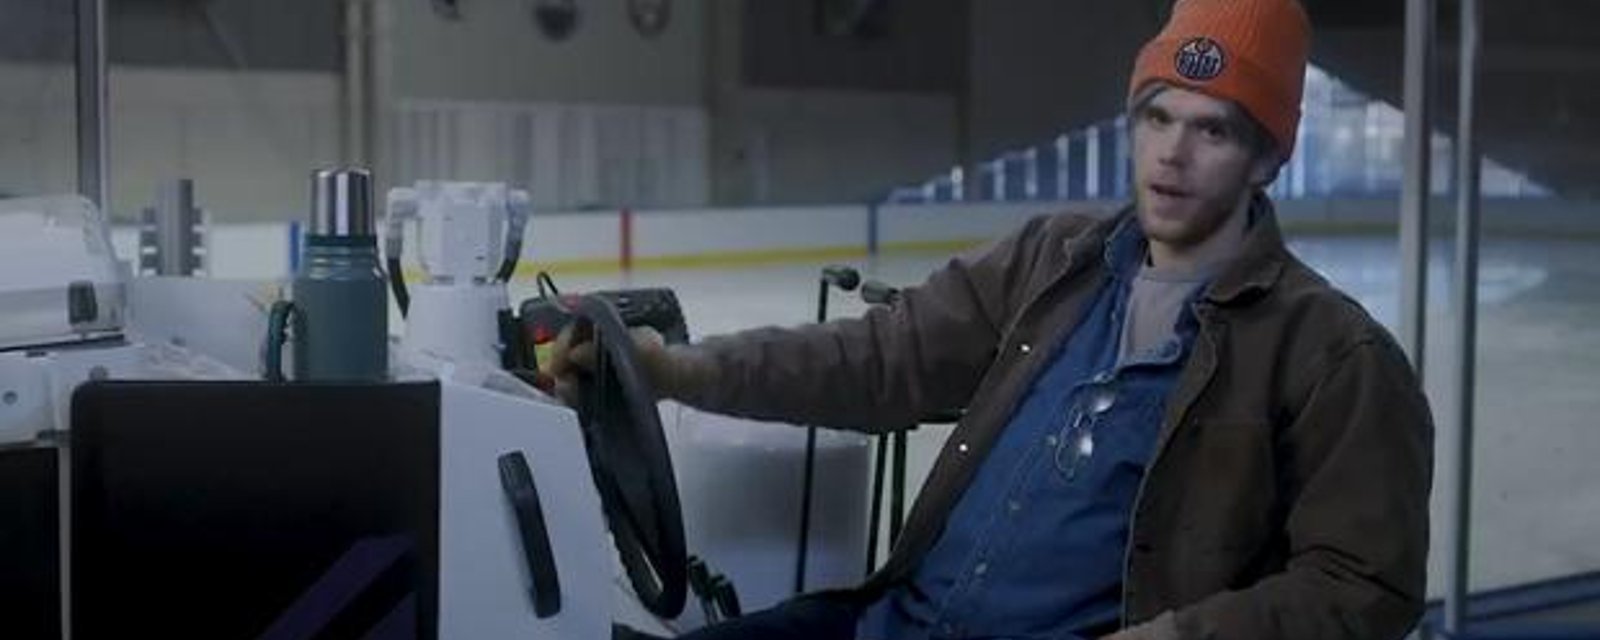 McDavid tells you what you need to be him in hilarious new commercial! 